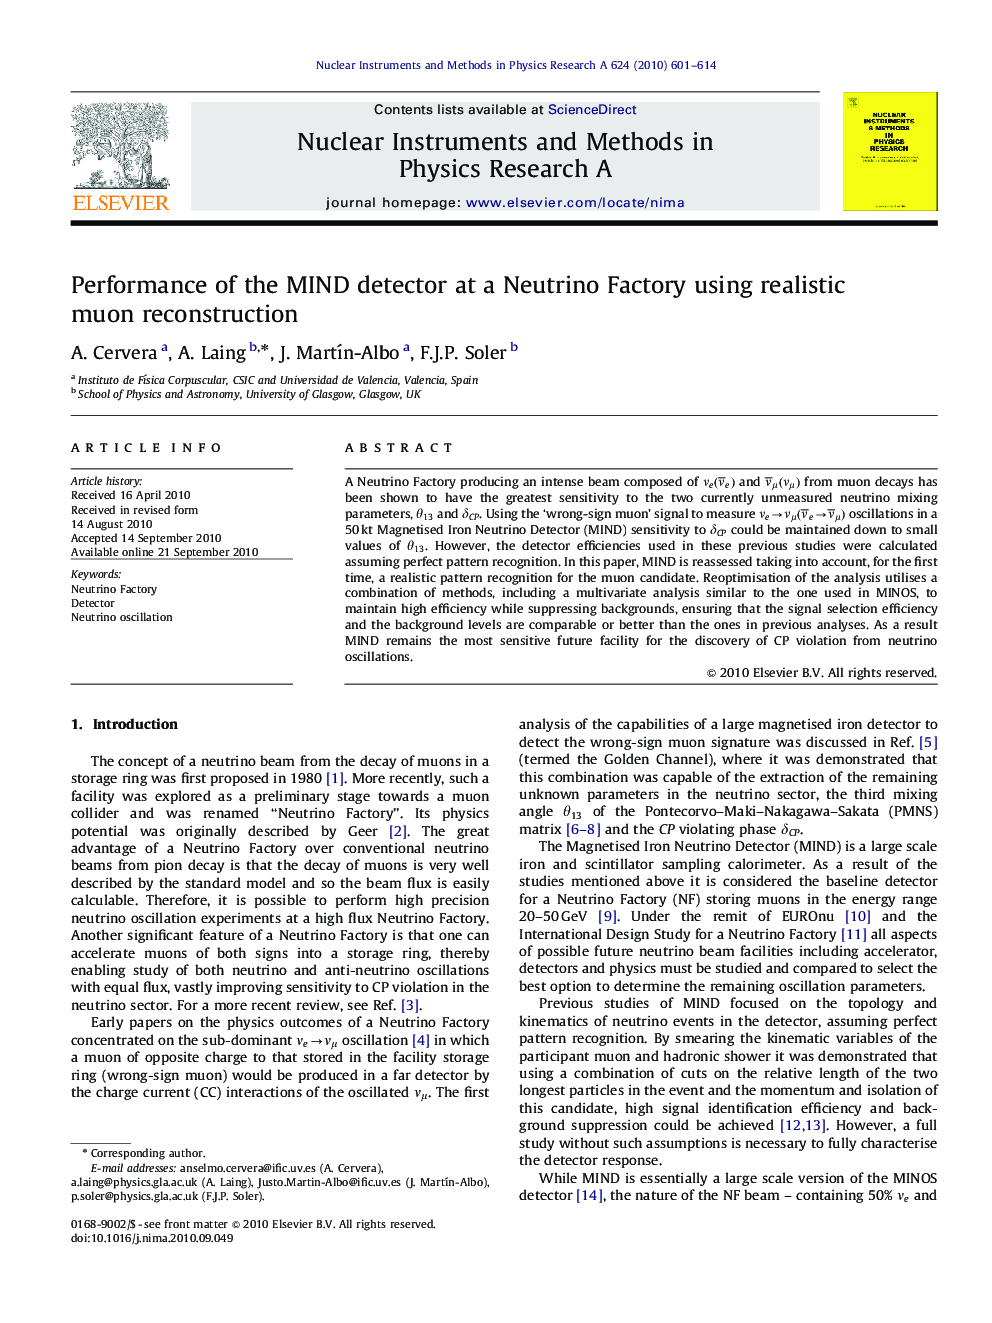 Performance of the MIND detector at a Neutrino Factory using realistic muon reconstruction